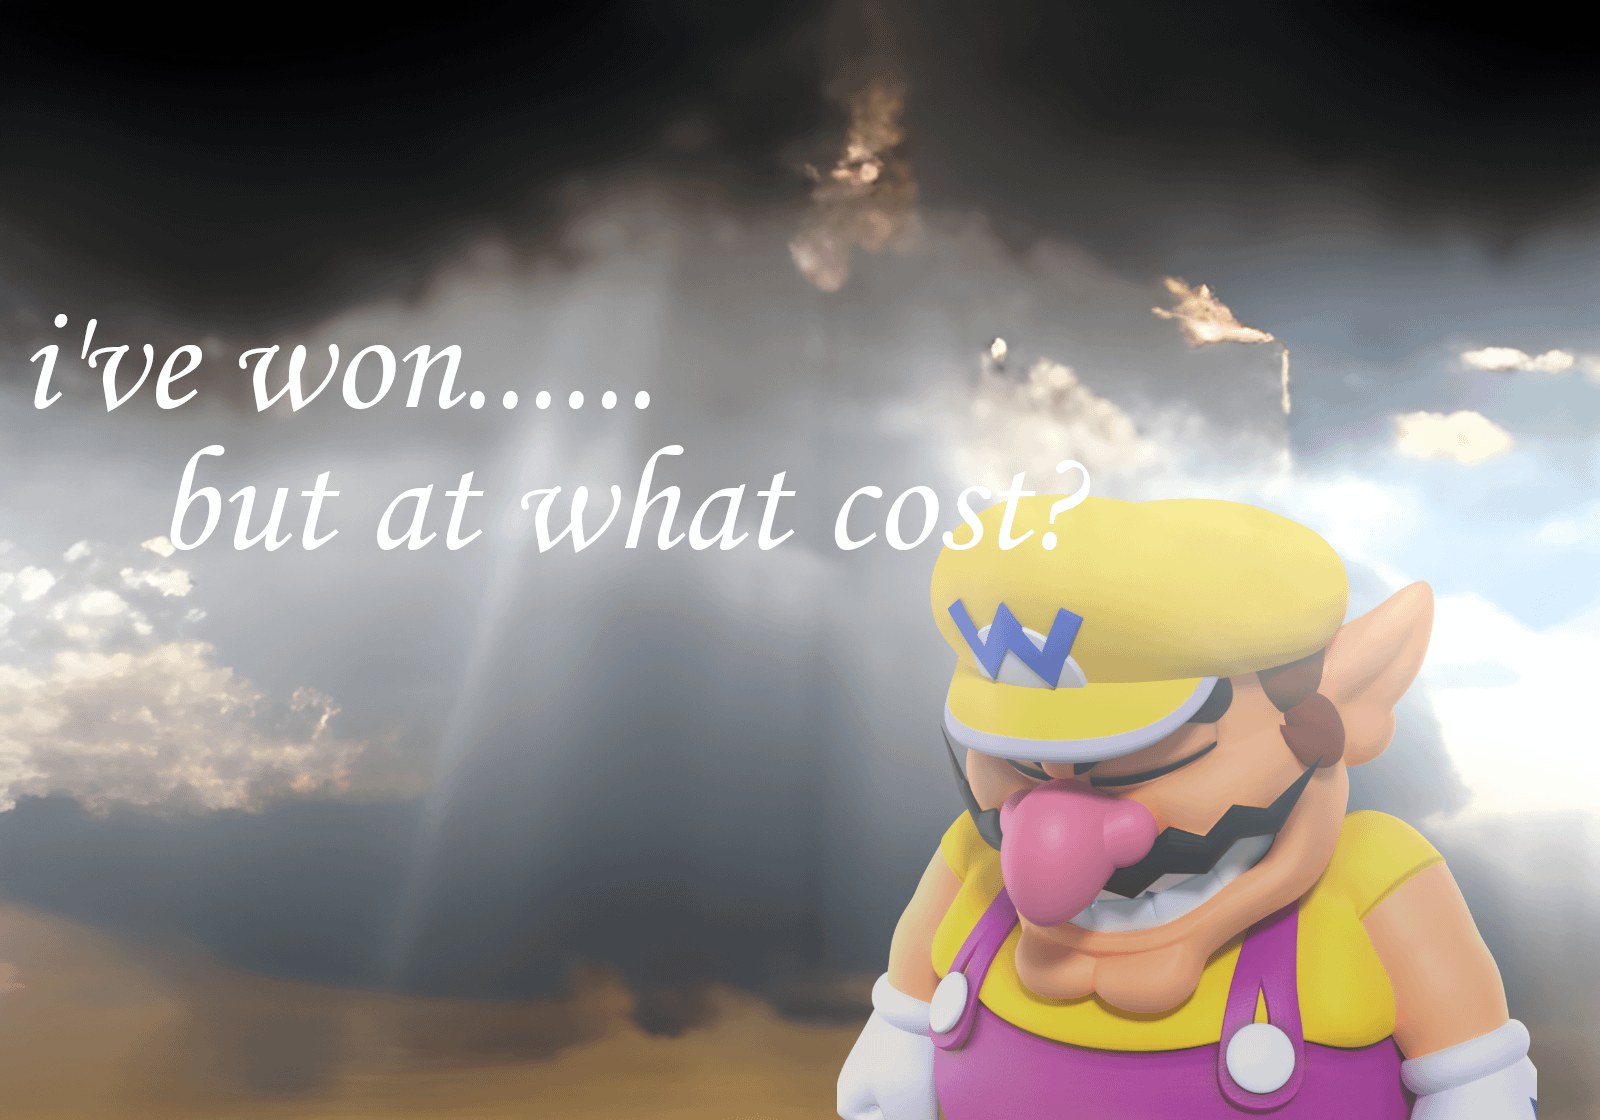 wario-ive-won-but-at-what-cost-meme-template-hd-remaster-v0-sdjxhxigs0ca1.png